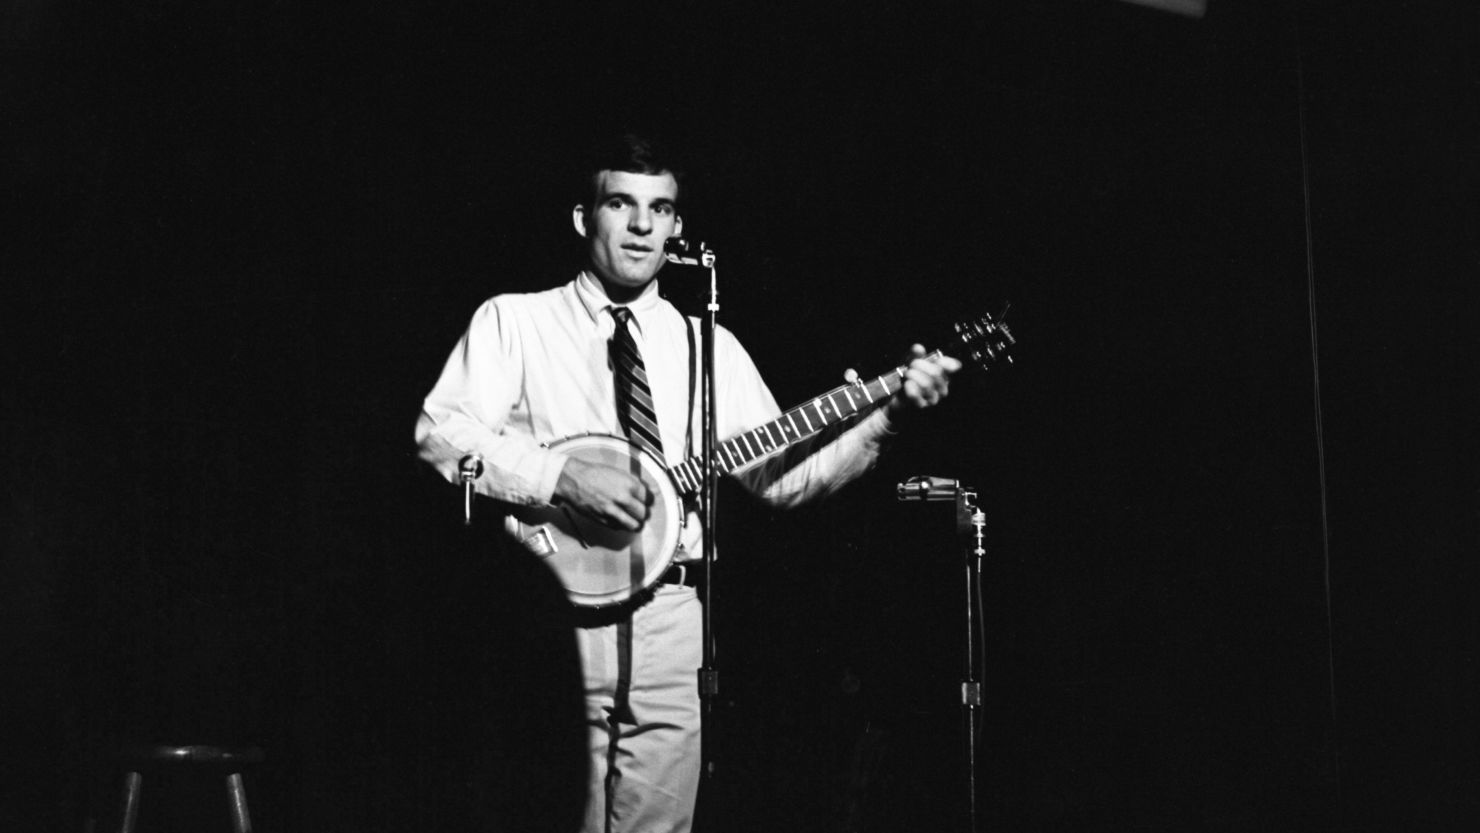 Steve Martin performing during his early stand-up days in the Apple documentary "STEVE! (martin) a documentary in 2 pieces"